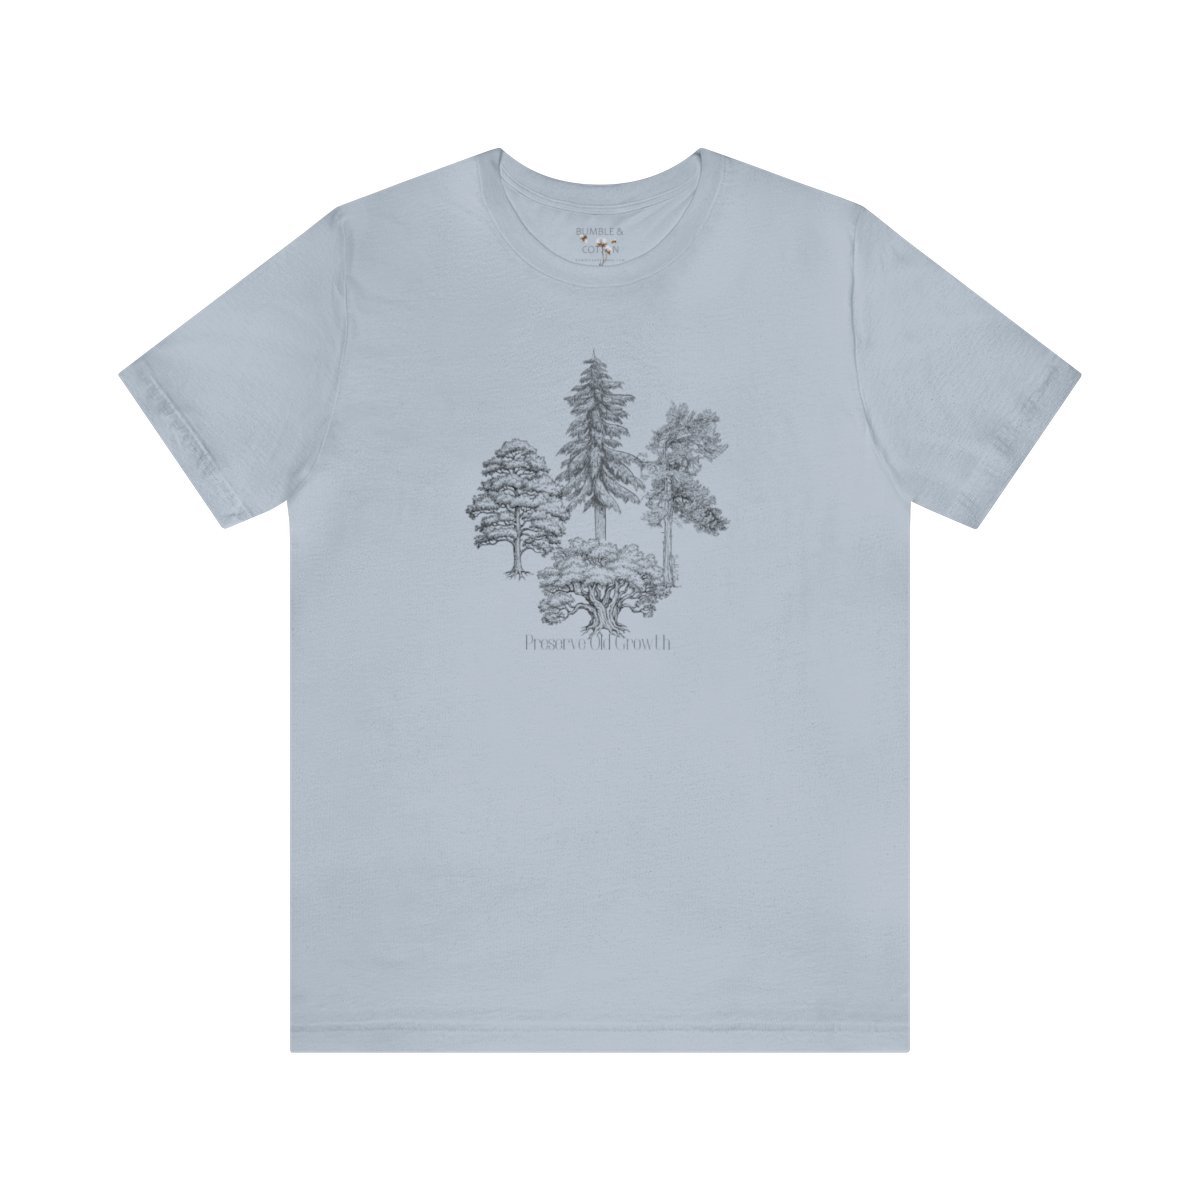 Old Growth Trees Tee || Unisex Fit 